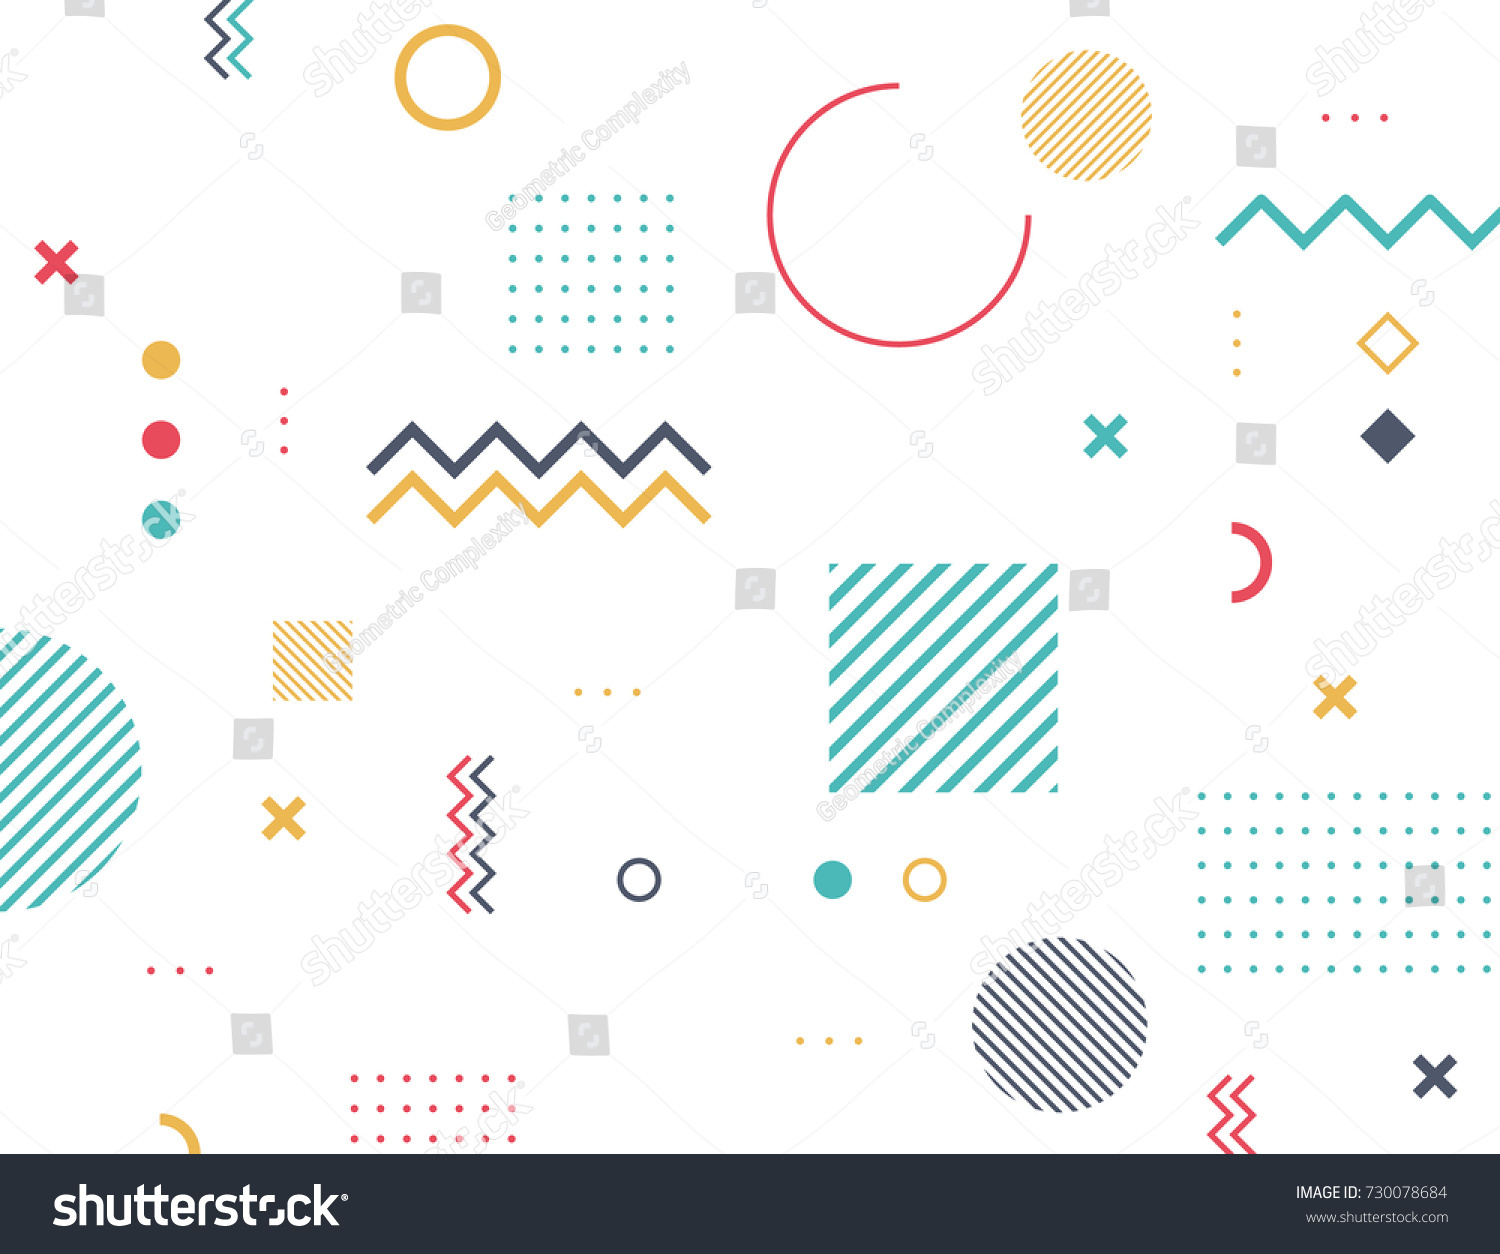 Pattern Hipster  Abstract. Form Geometric Line Shapes. fashion style seamless background.